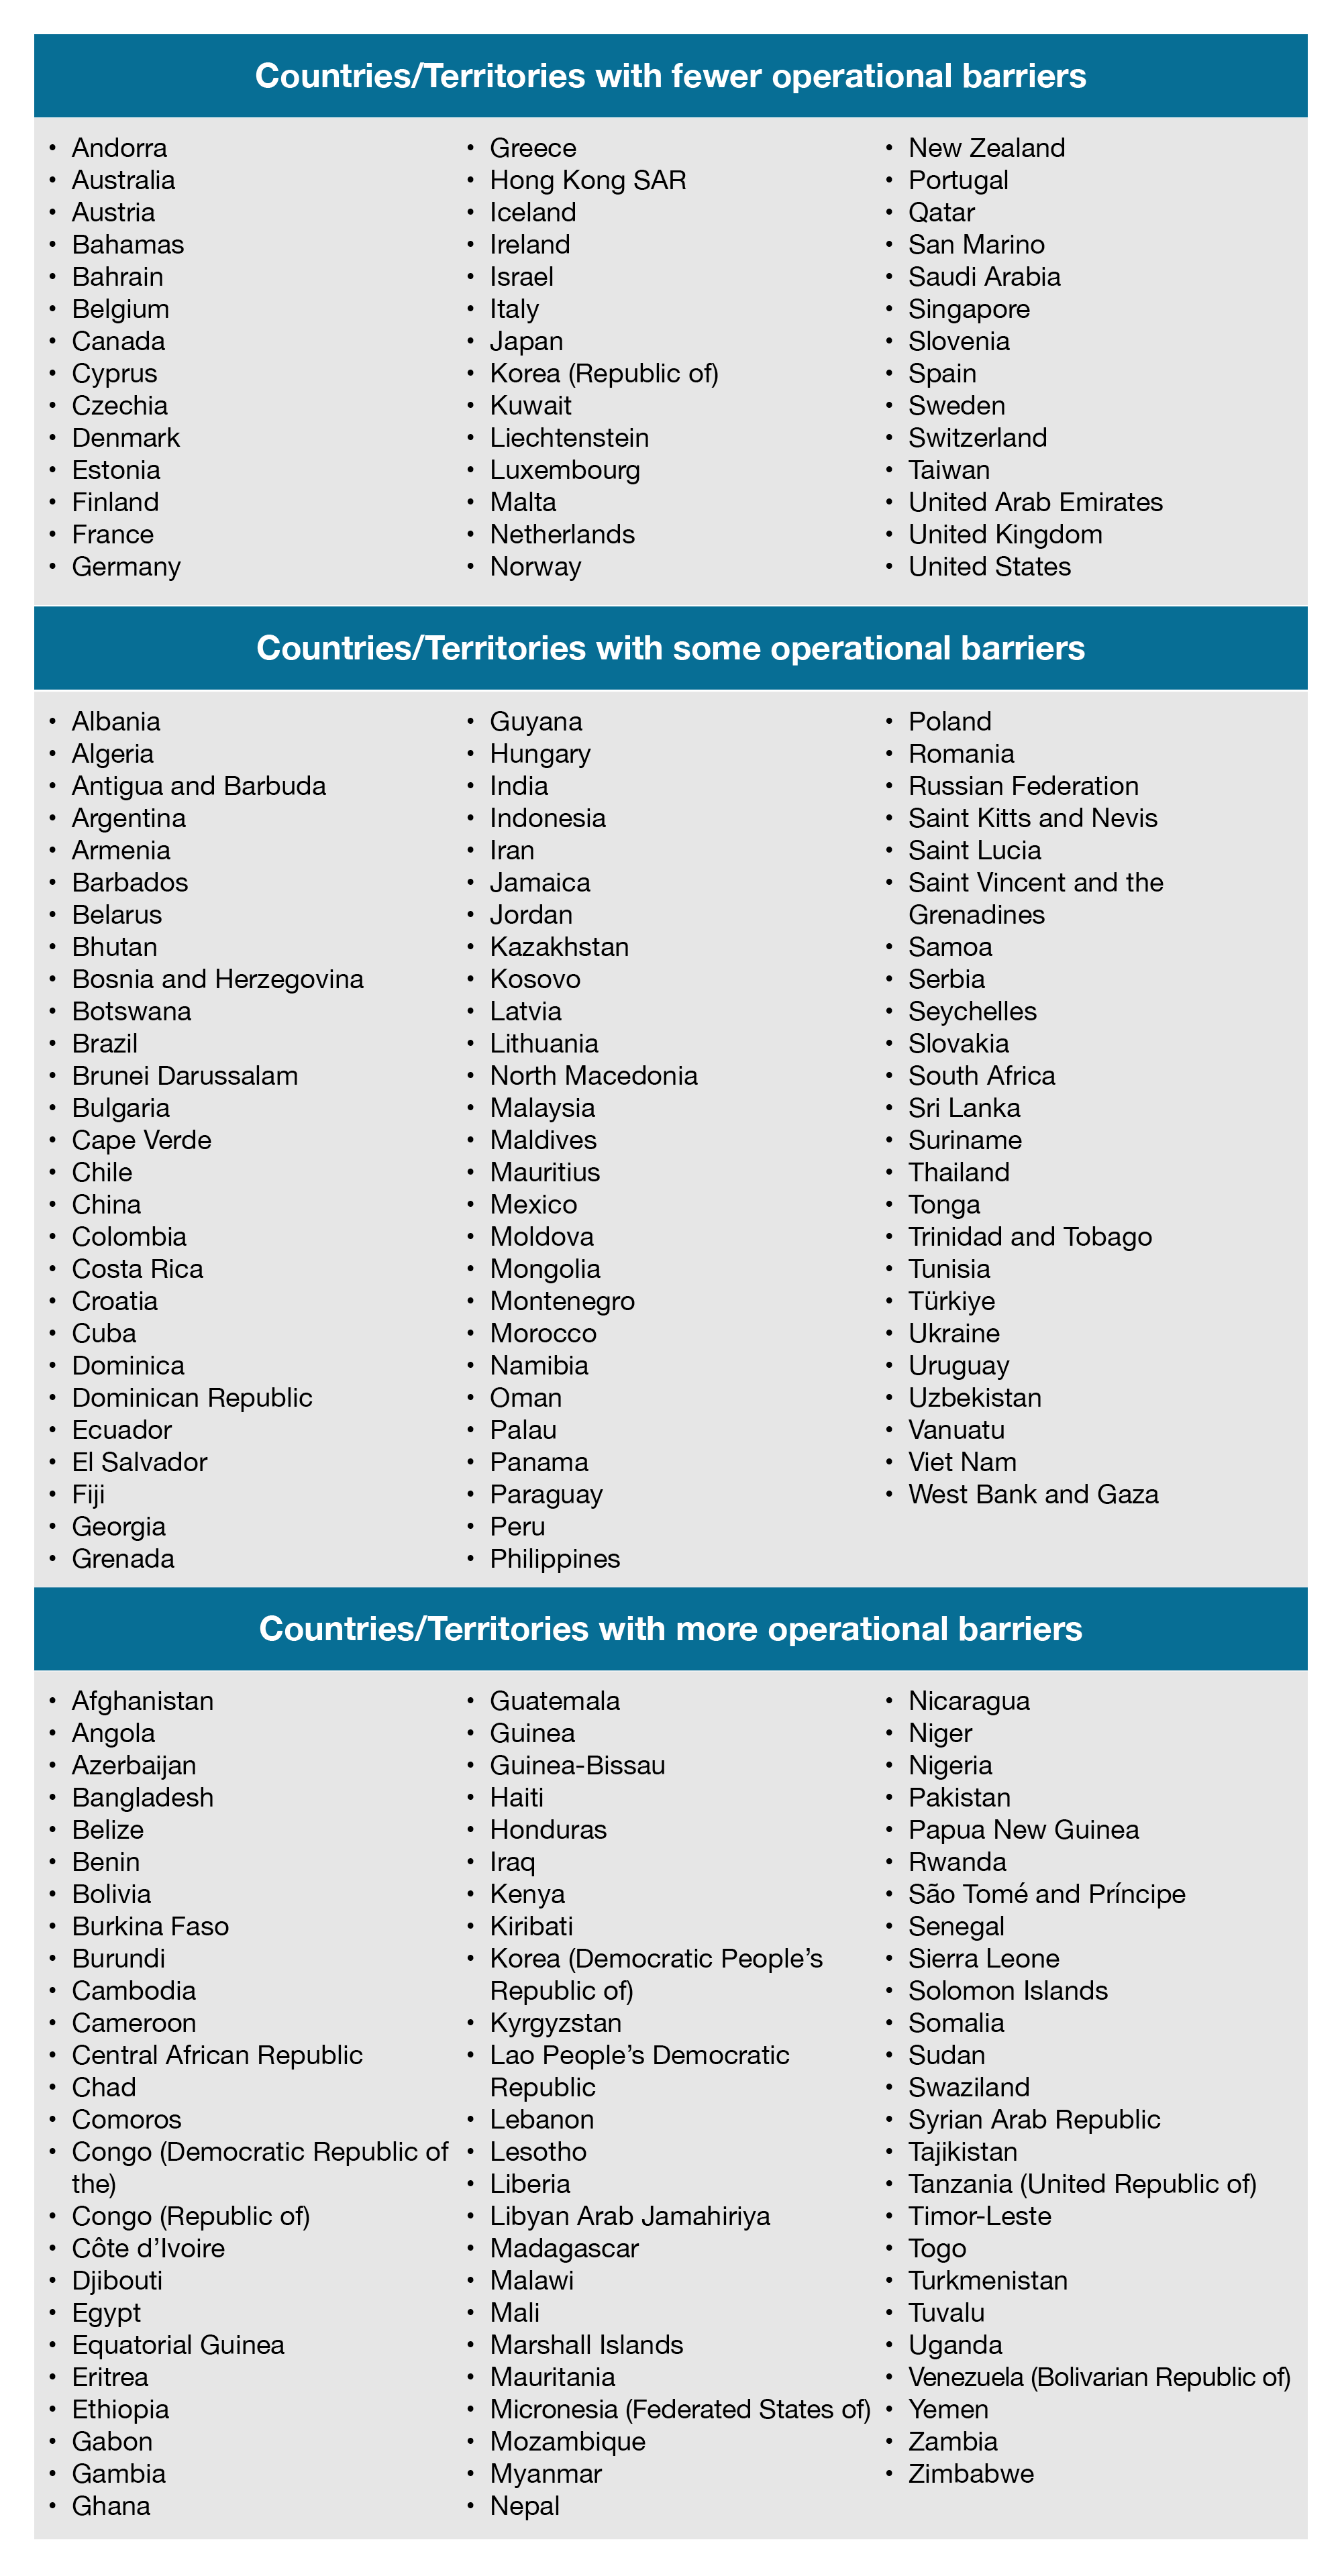 Countries/Territories listed with determined classification of fewer operational barriers, some operational barriers, and more operational barriers.